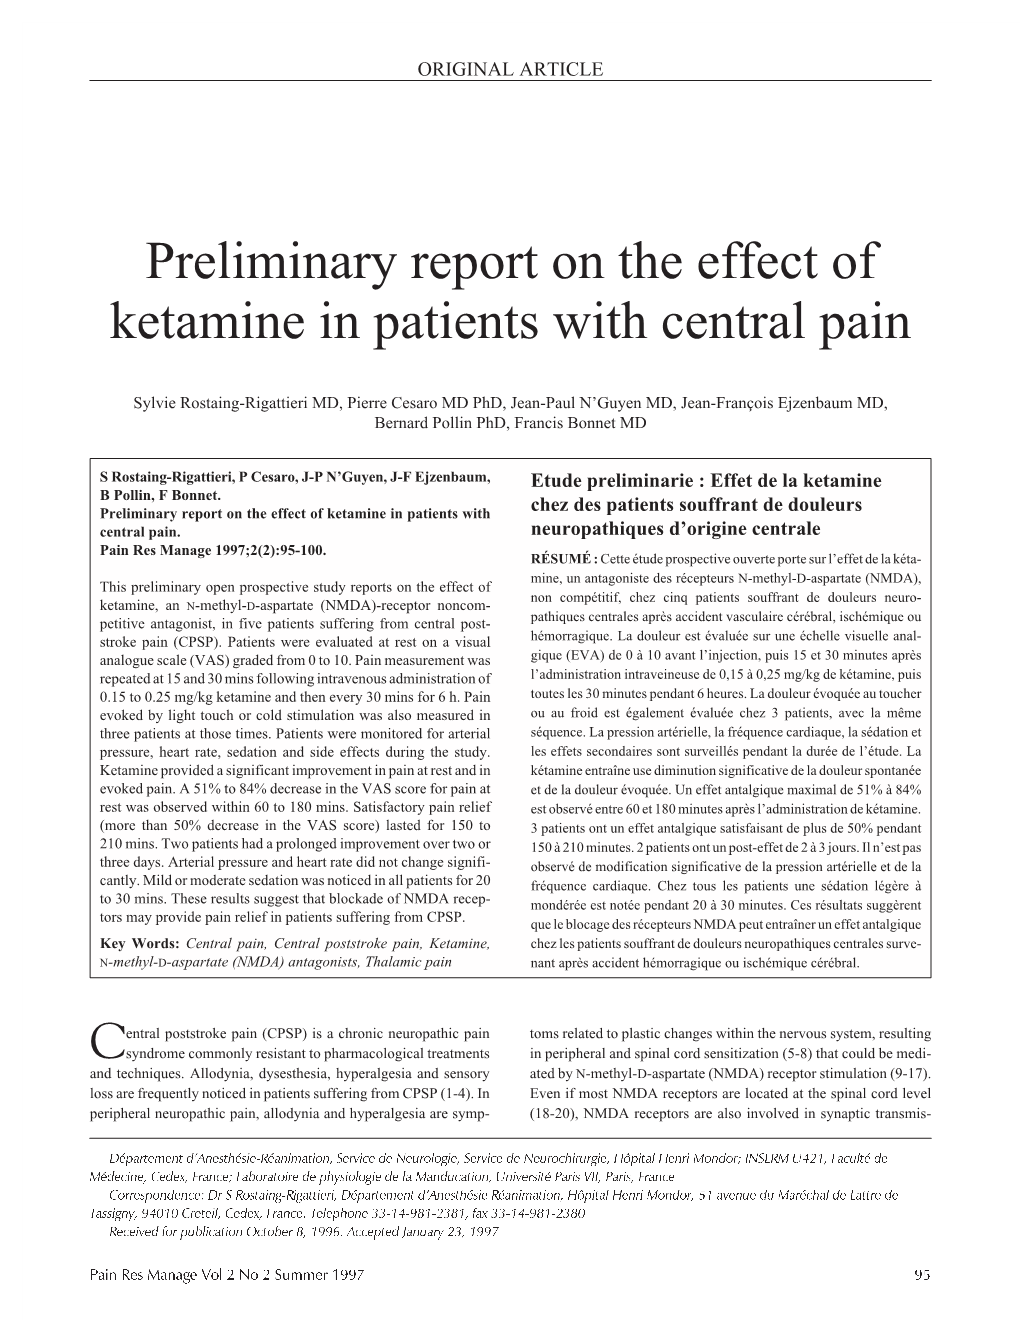 Preliminary Report on the Effect of Ketamine in Patients with Central Pain